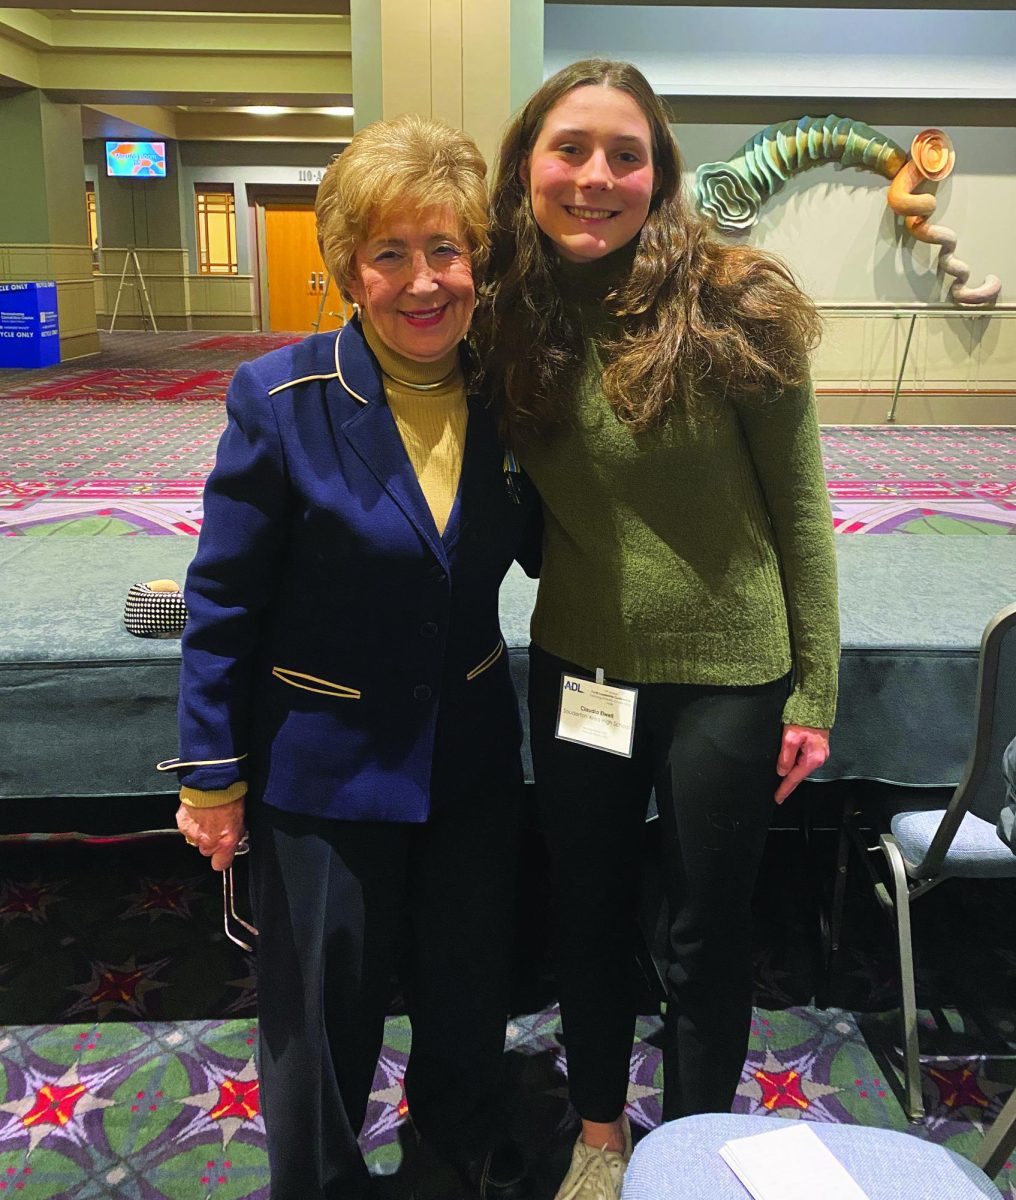 A historical perspective...After hearing Holocaust survivor Ruth Kapp Hartz speak at the ADL Youth Conference on November 29, Arrowhead Co-Editor-In-Chief Claudia Ewell met with Hartz for an interview.